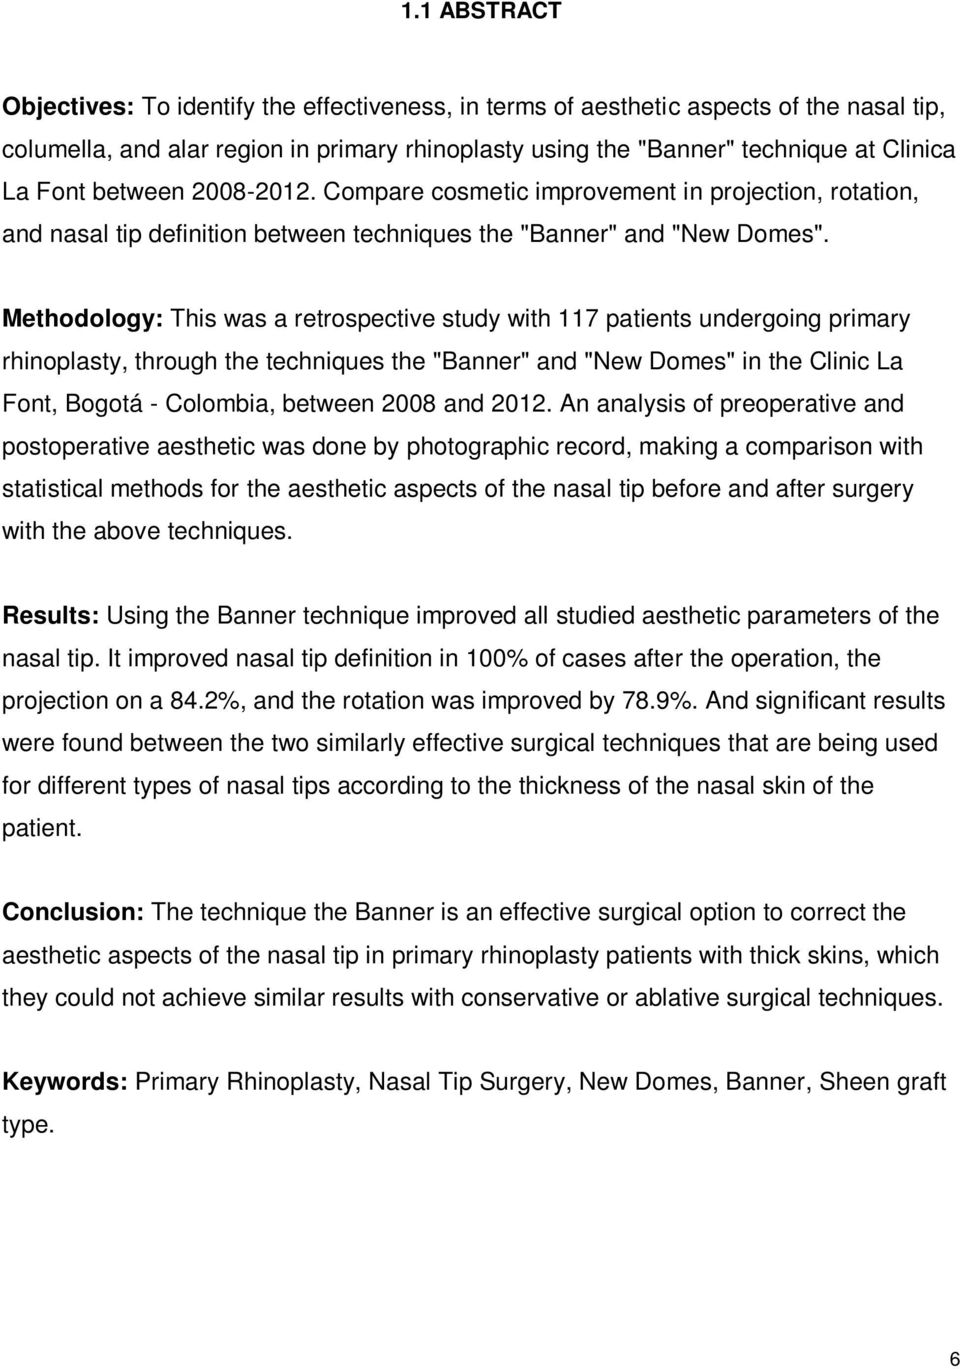 Methodology: This was a retrospective study with 117 patients undergoing primary rhinoplasty, through the techniques the "Banner" and "New Domes" in the Clinic La Font, Bogotá - Colombia, between